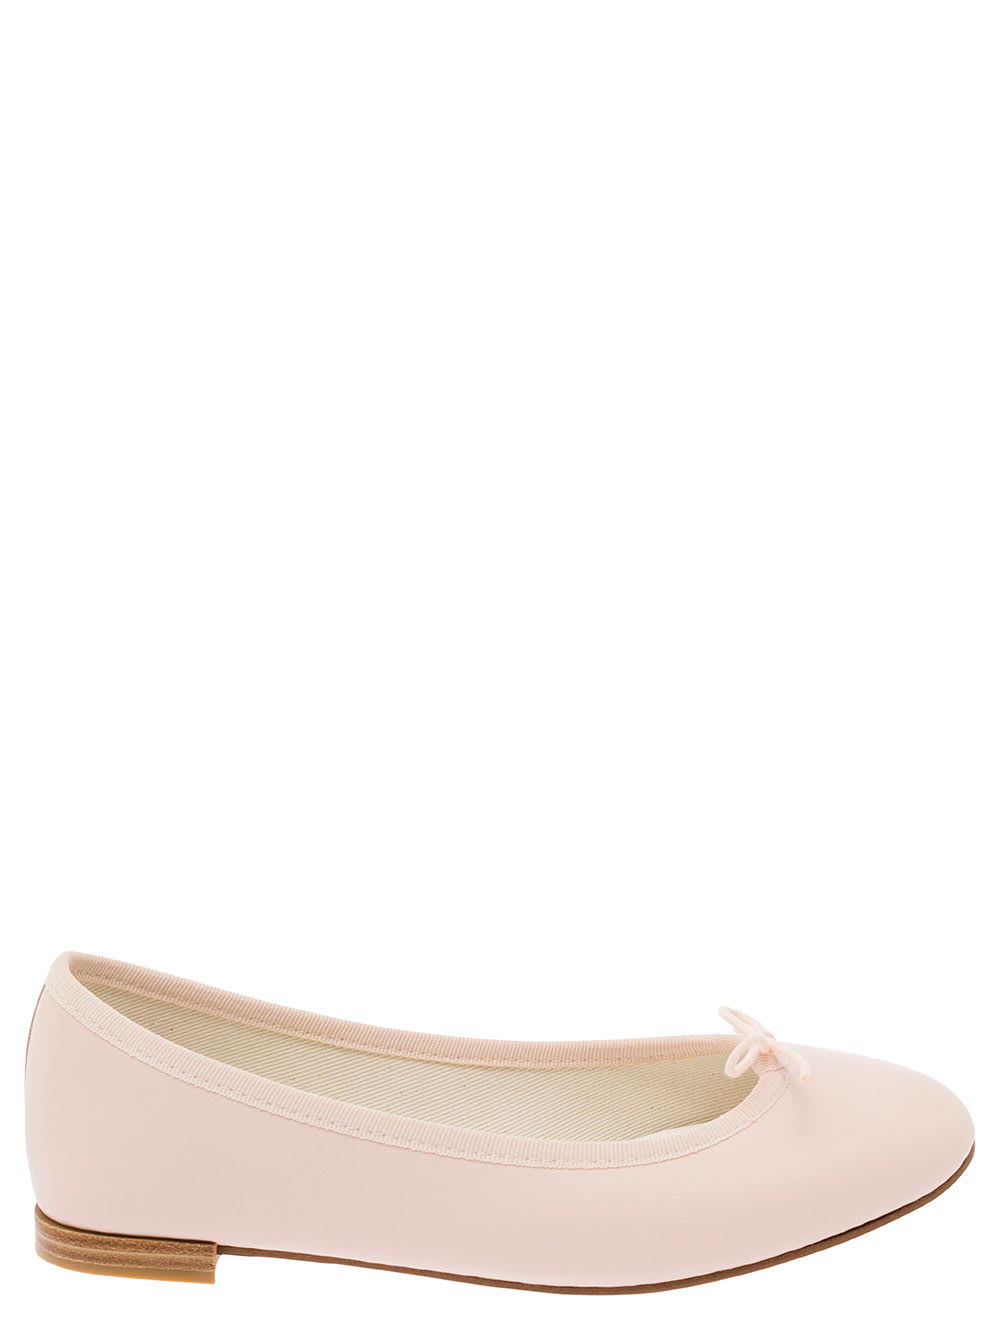 REPETTO CENDRILLON PINK BALLET FLATS WITH BOW DETAIL IN SMOOTH LEATHER WOMAN